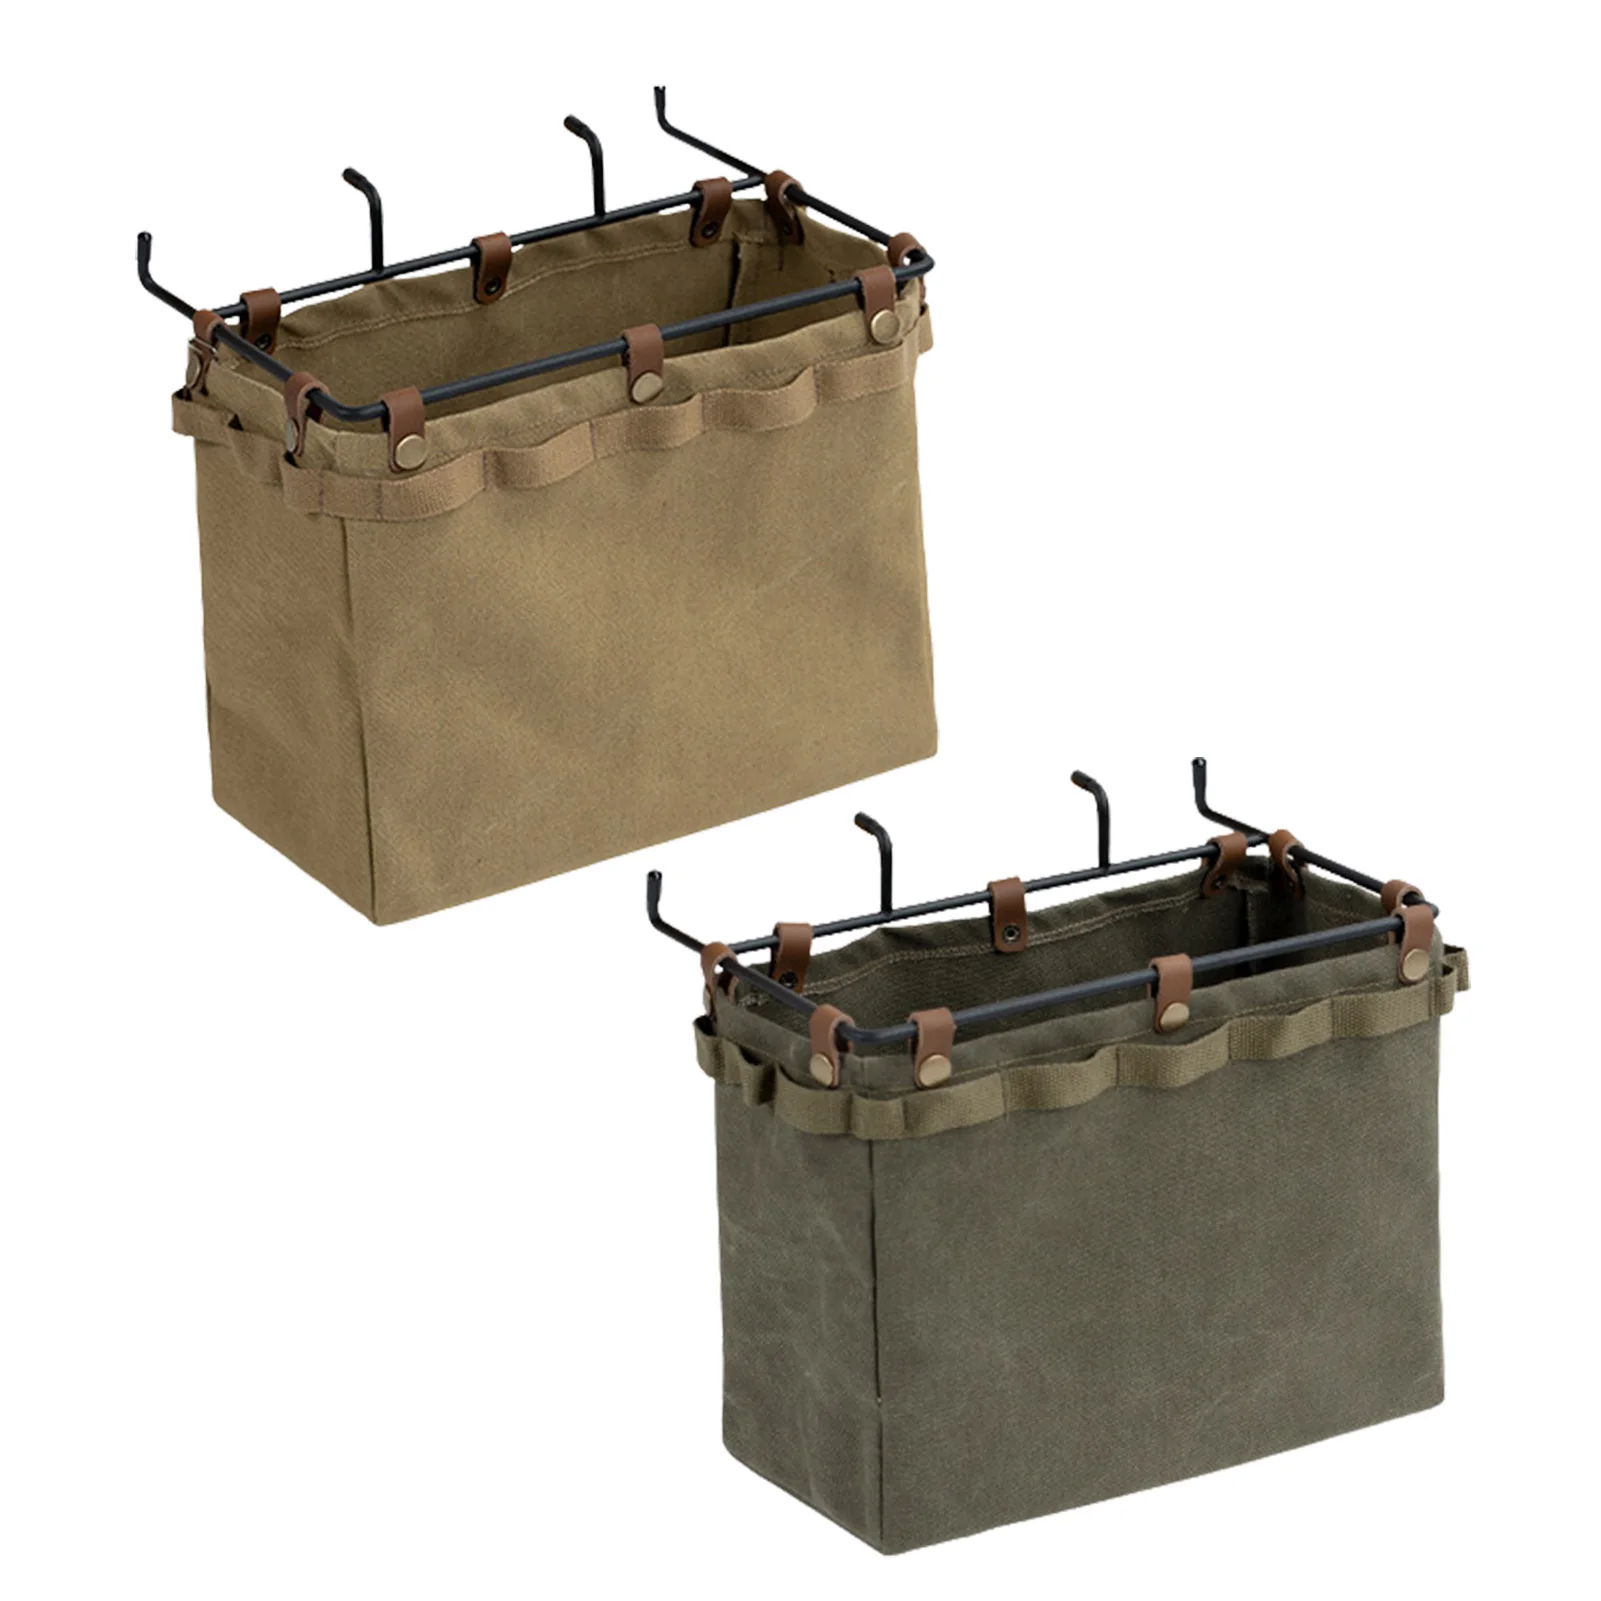 Camping Table Side Hangings Bag Desk Side Storage Bag Foldable Canvas Storage Bags Picnic Convenient Outdoor Storage Bags